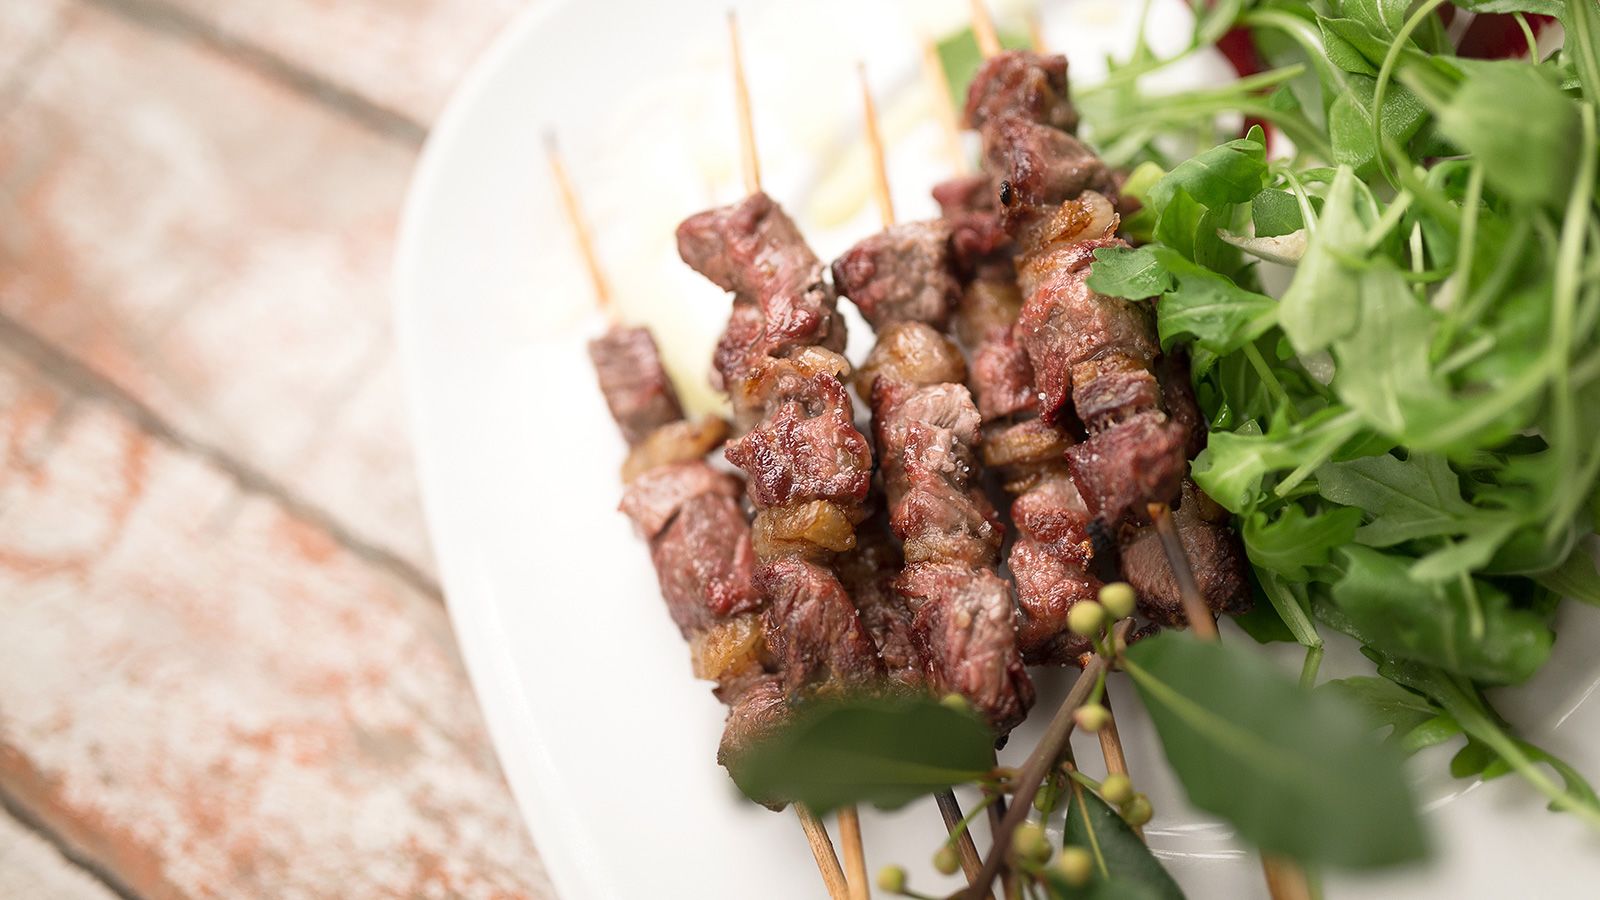 <strong>Stick it out:</strong> Arrosticini are skewers of lamb or mutton chunks interspersed with fat to make them extra juicy.